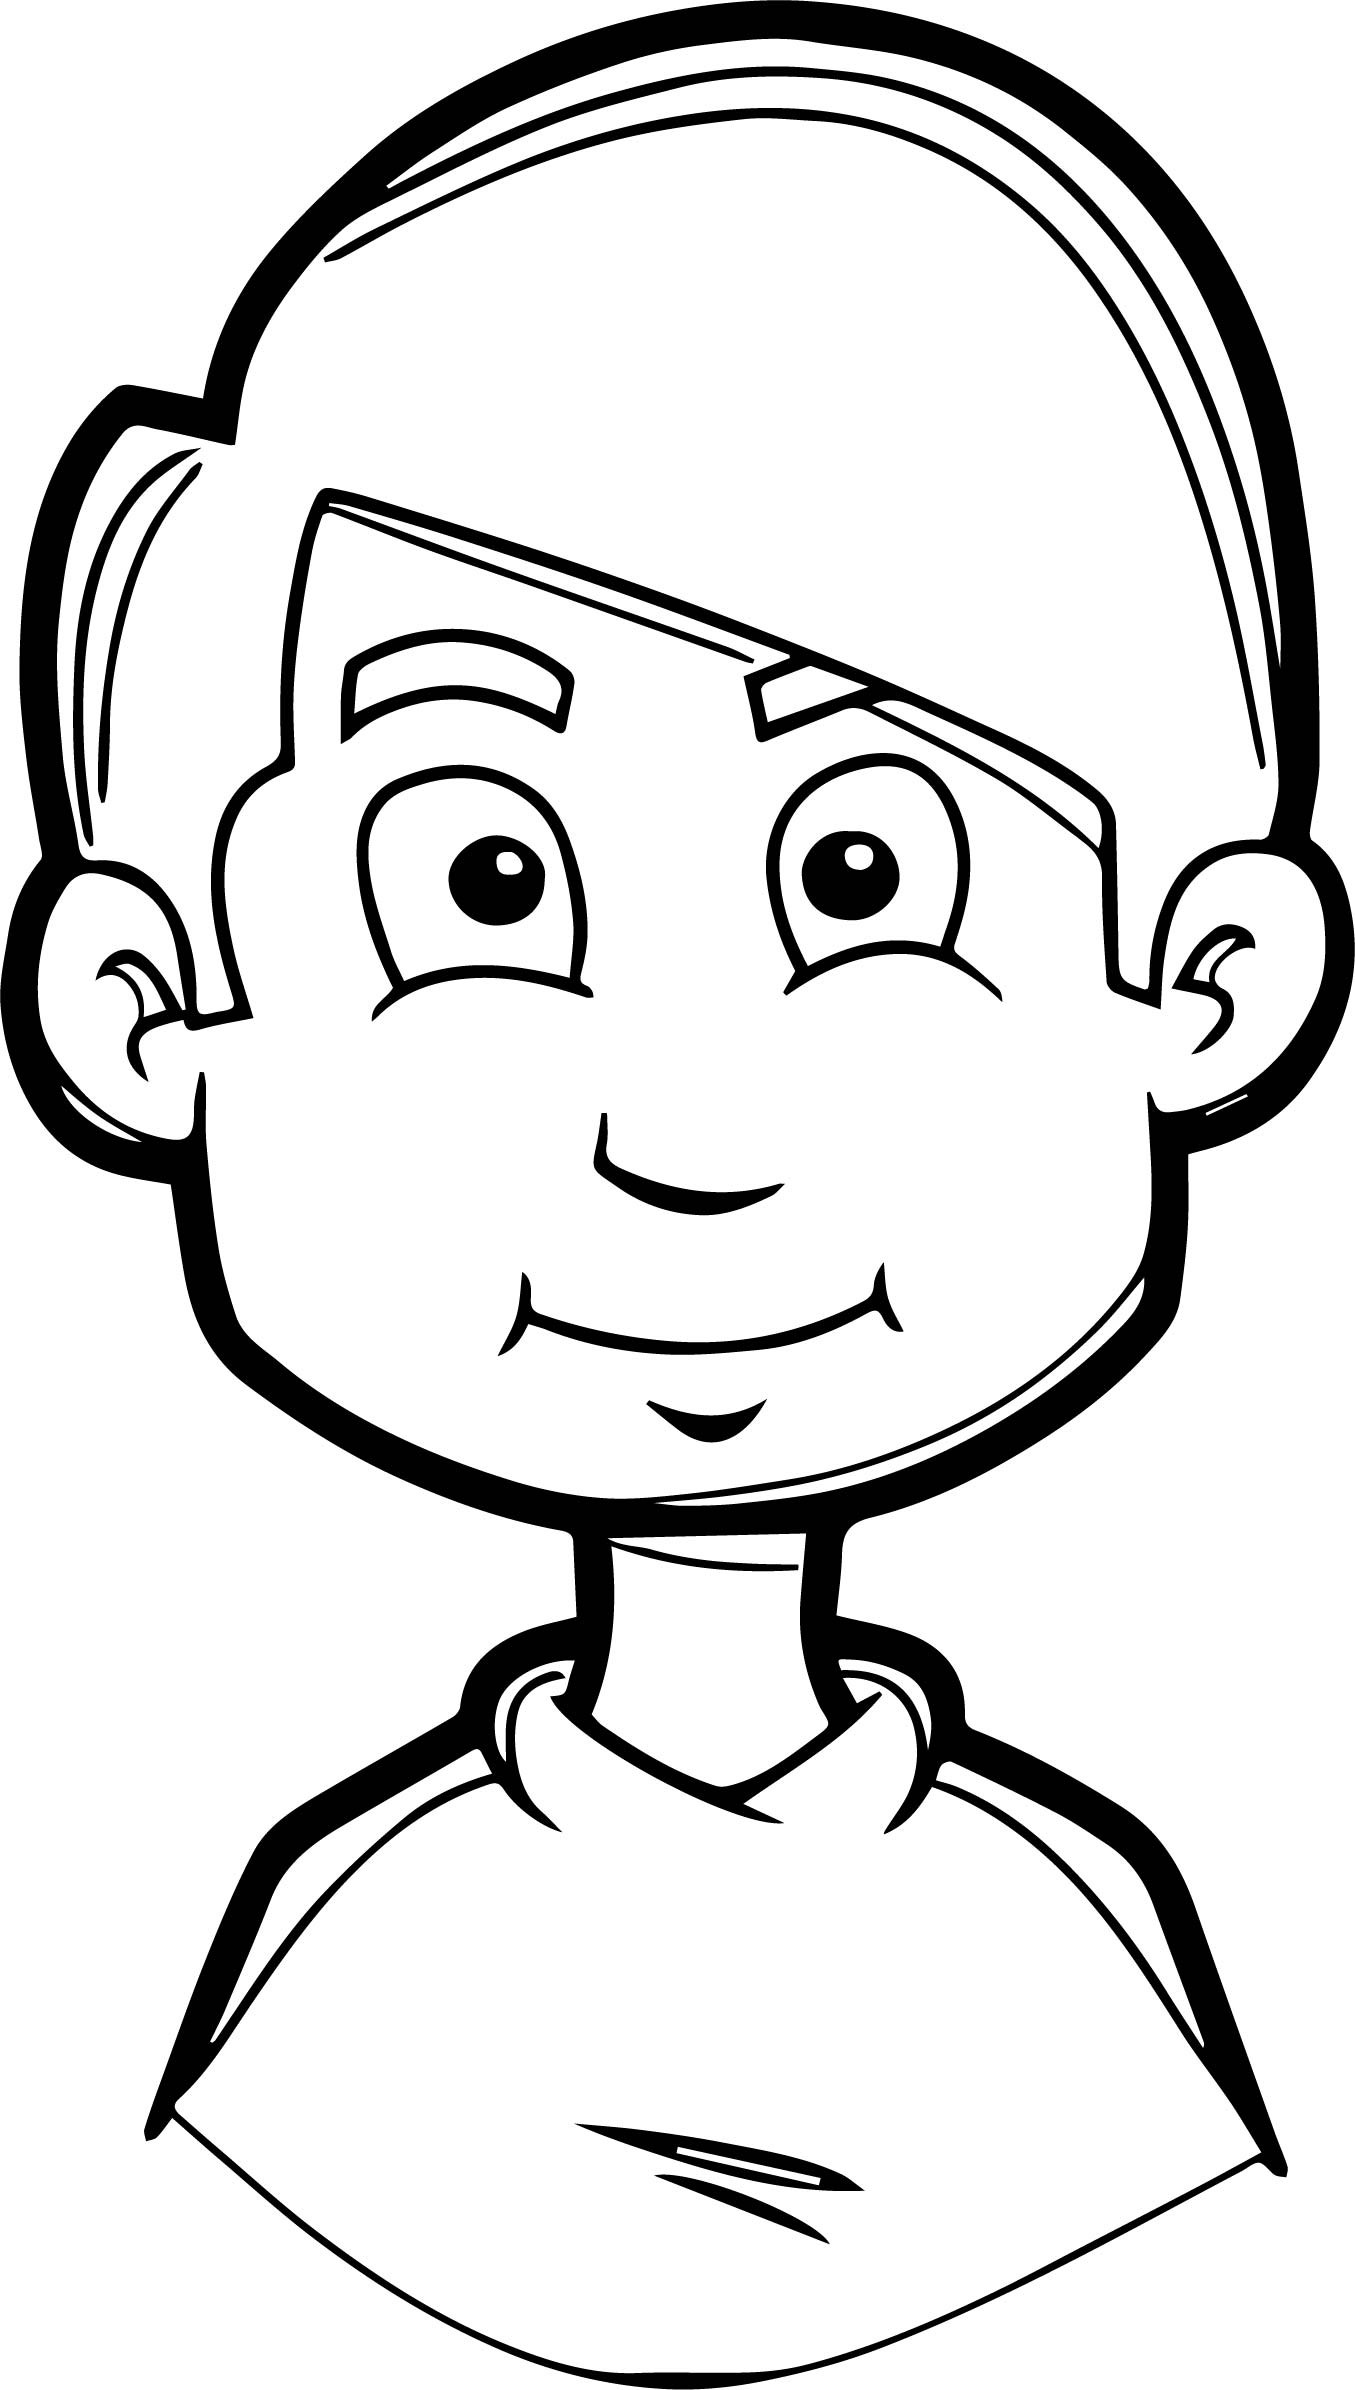 Boys Face Coloring Pages
 Boy Soccer Face Coloring Page